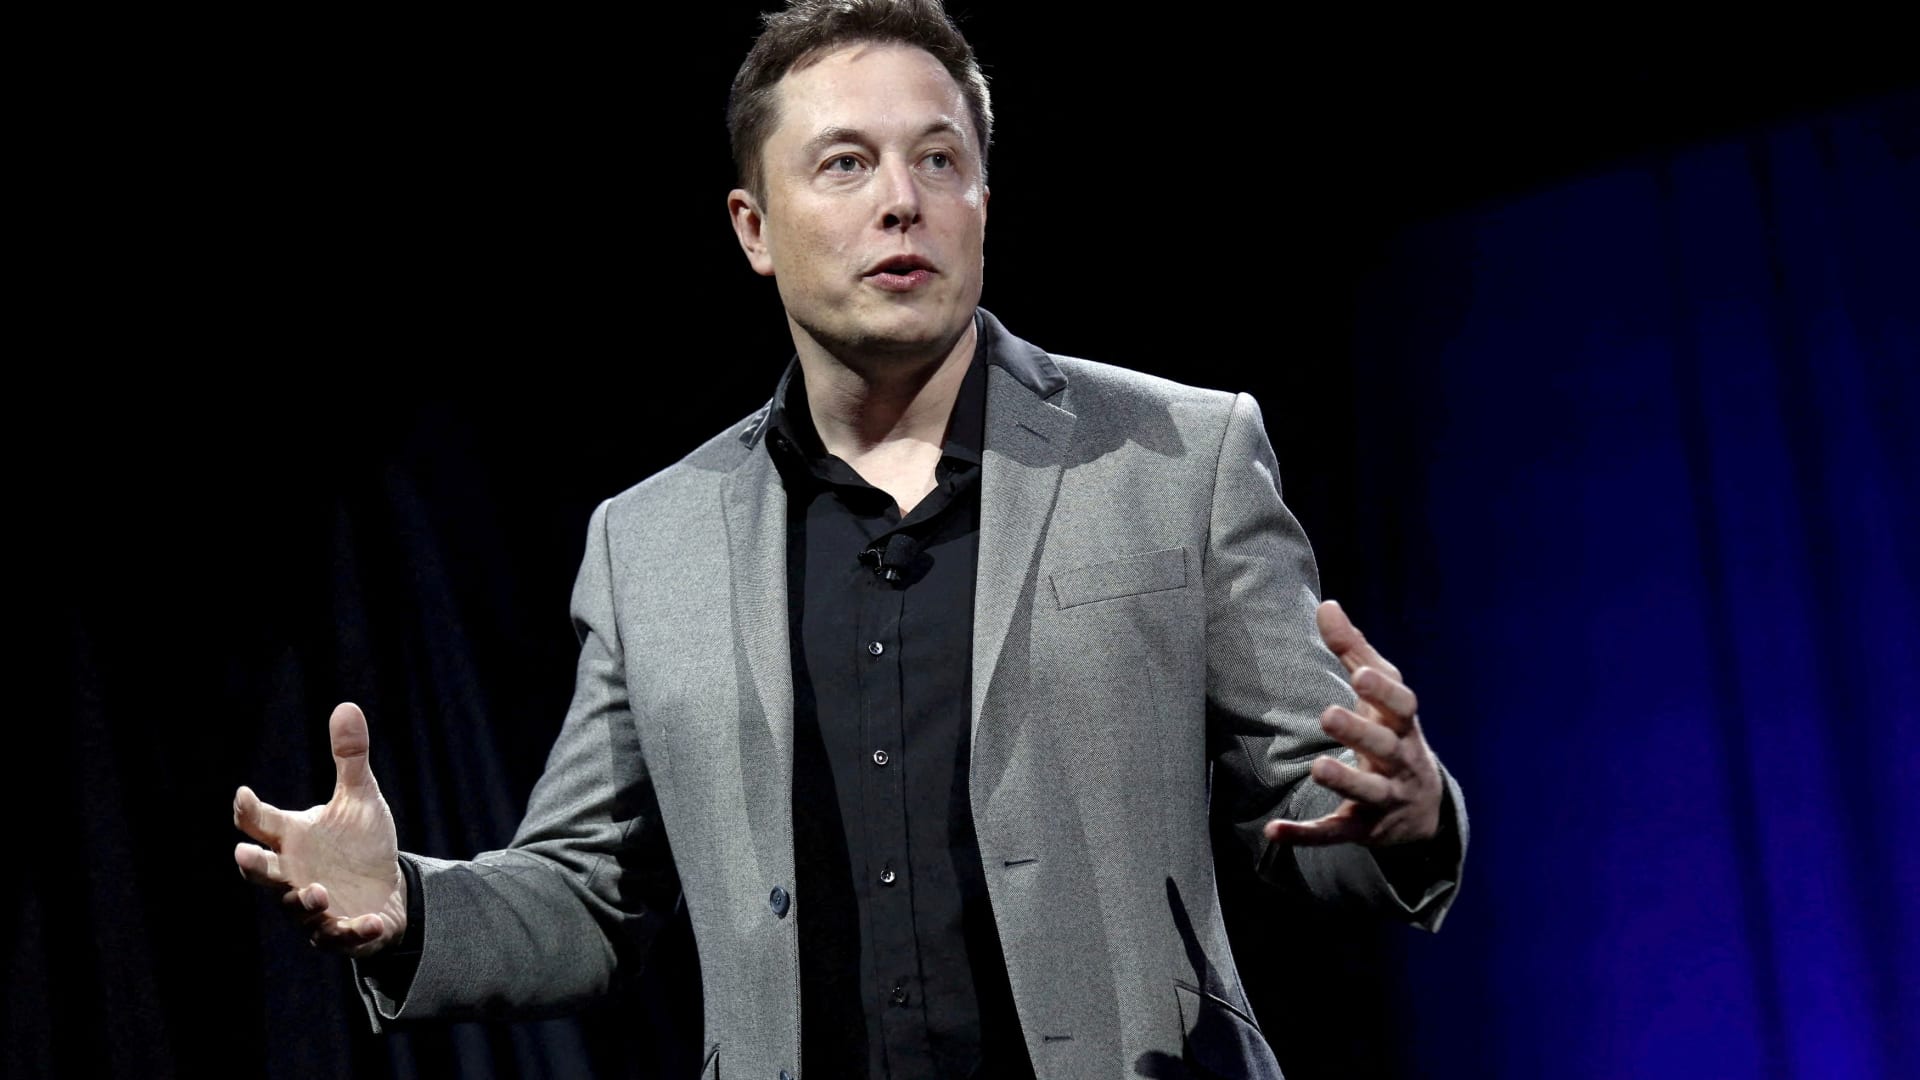 Tesla sinks to almost two-year low on Elon Musk stock sales, Twitter distraction Auto Recent